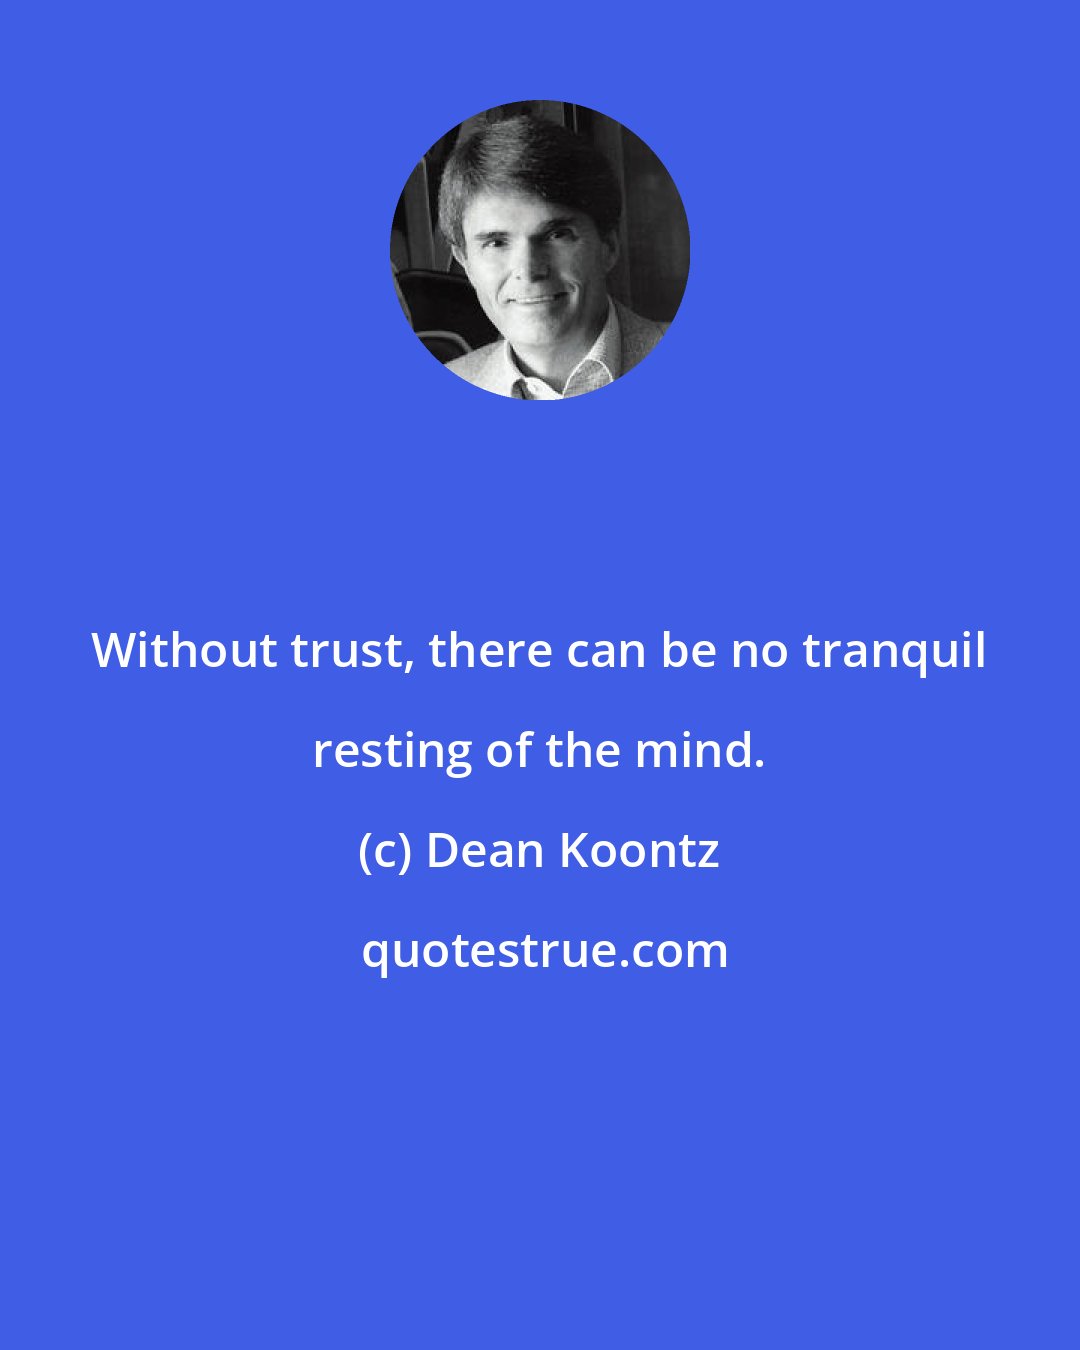 Dean Koontz: Without trust, there can be no tranquil resting of the mind.